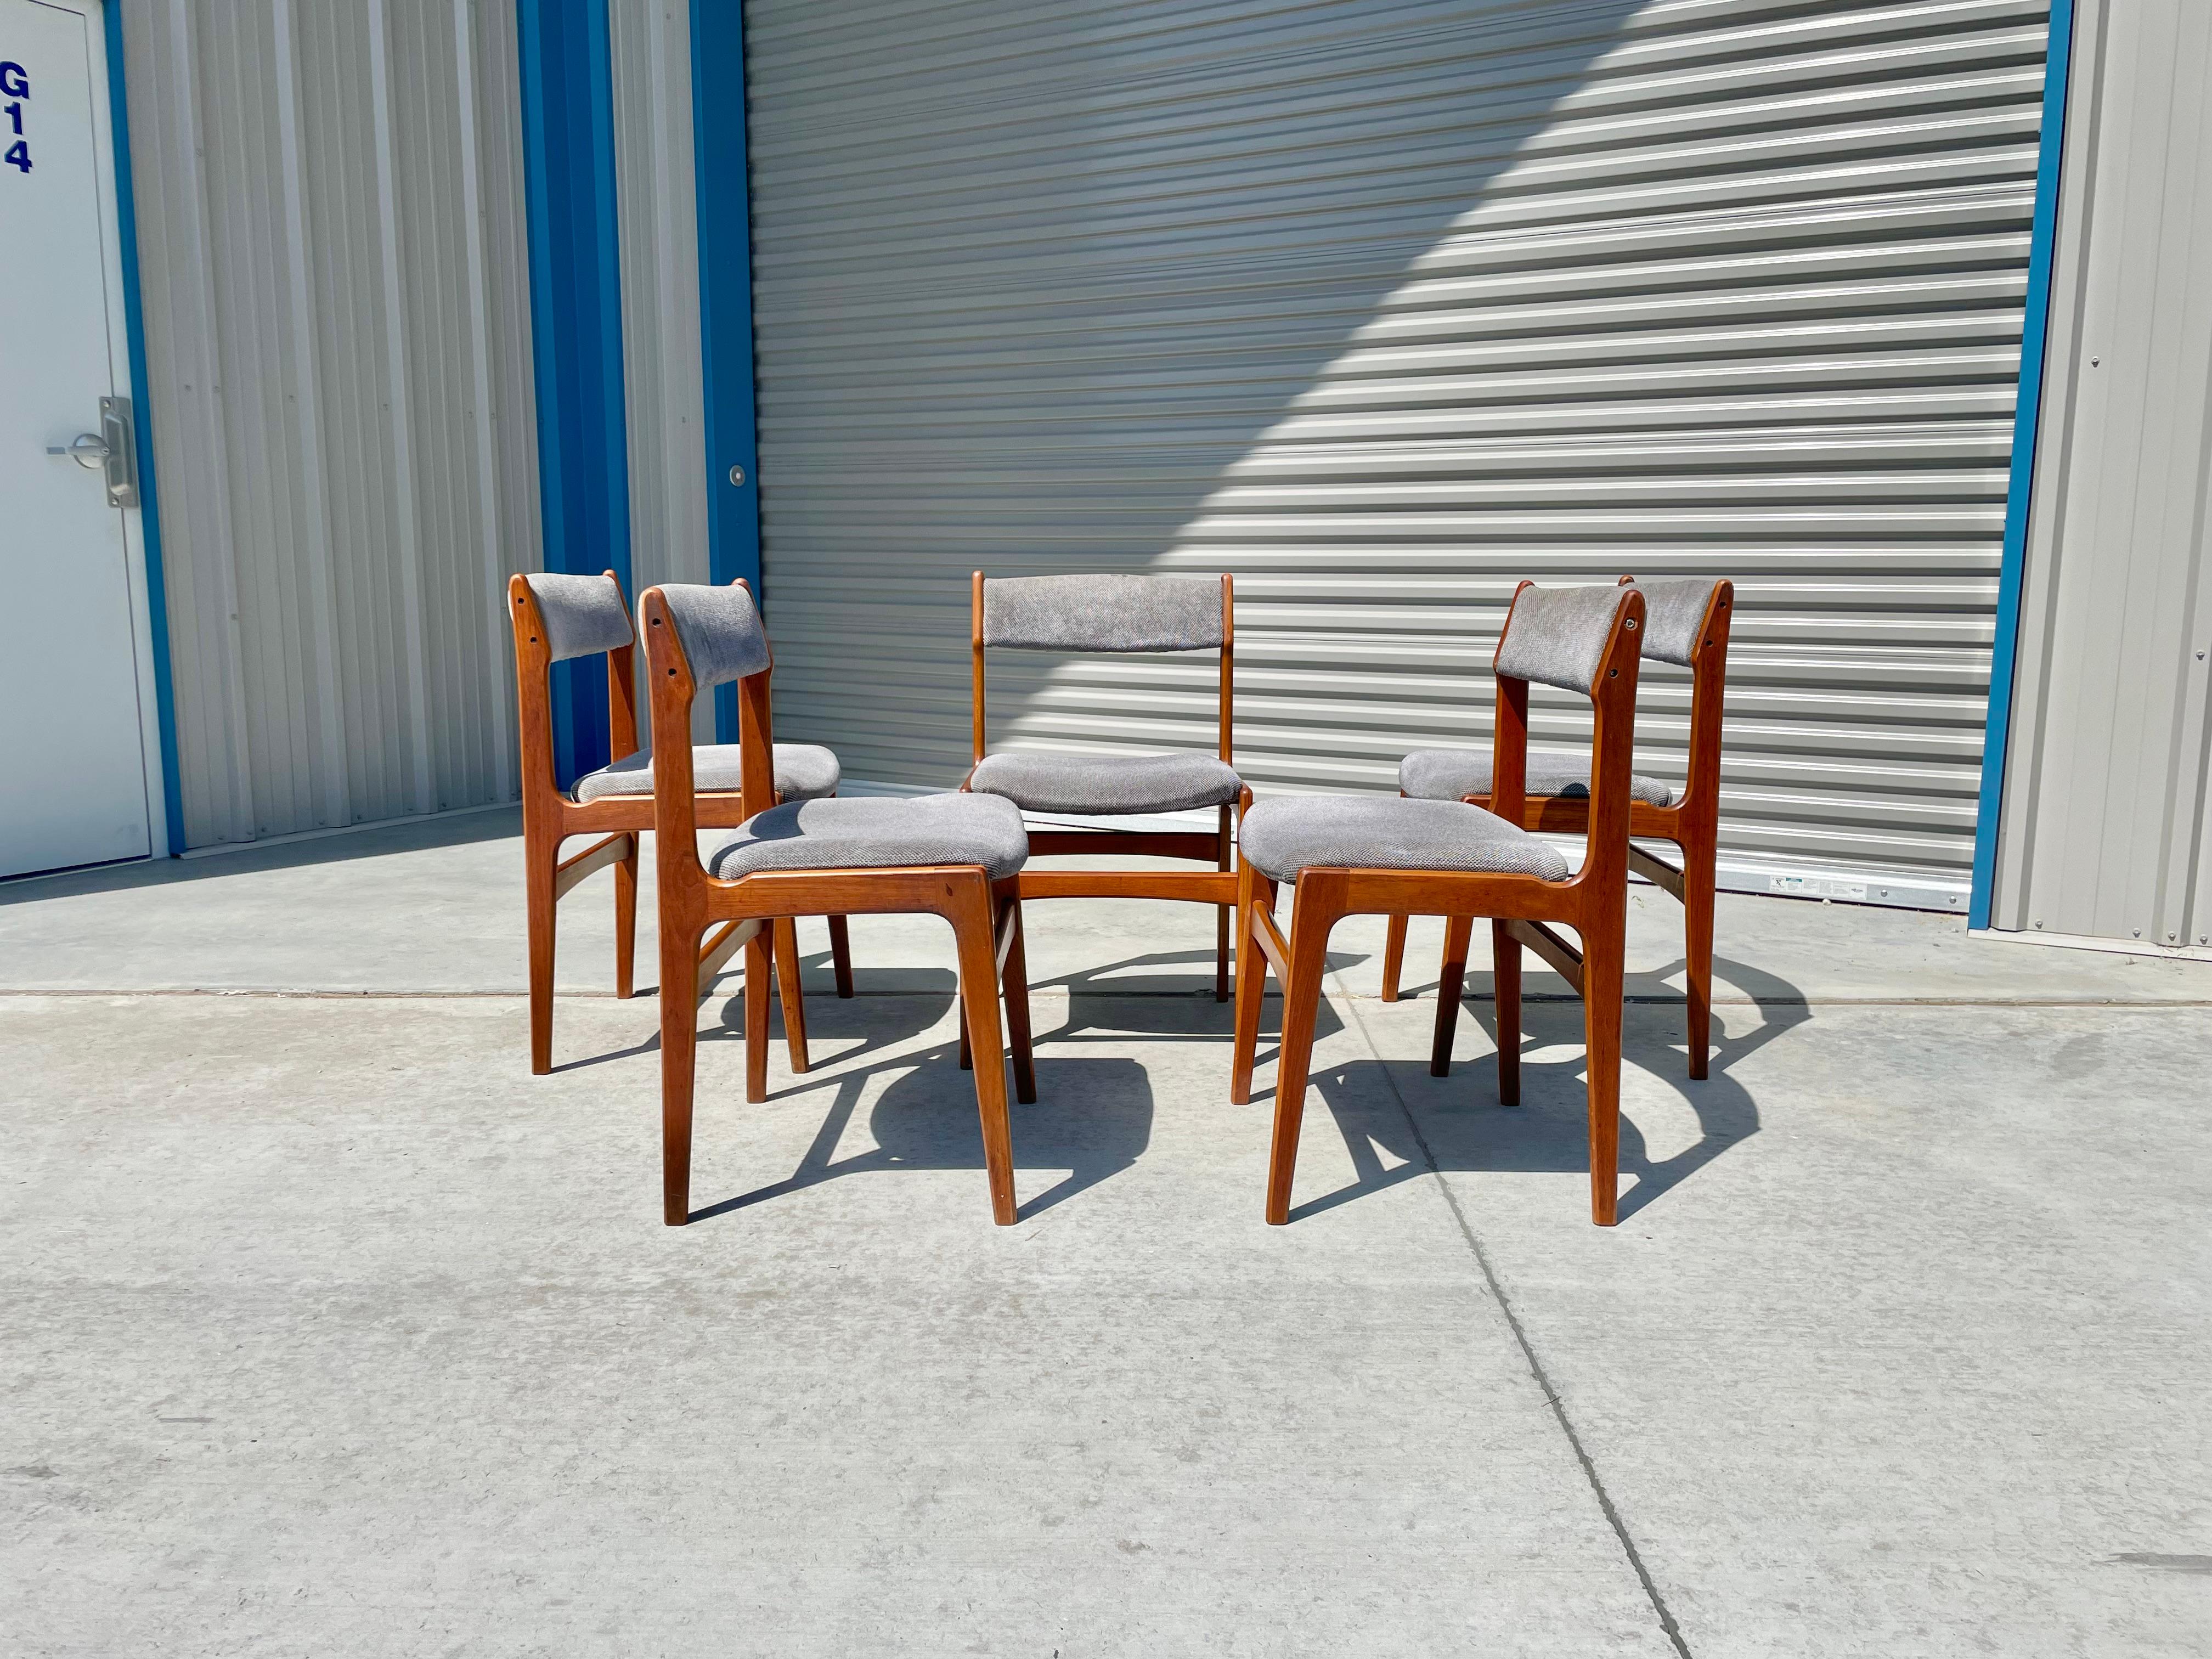 Mid-20th Century 1960s Danish Modern Teak Dining Chairs - Set of 6 For Sale